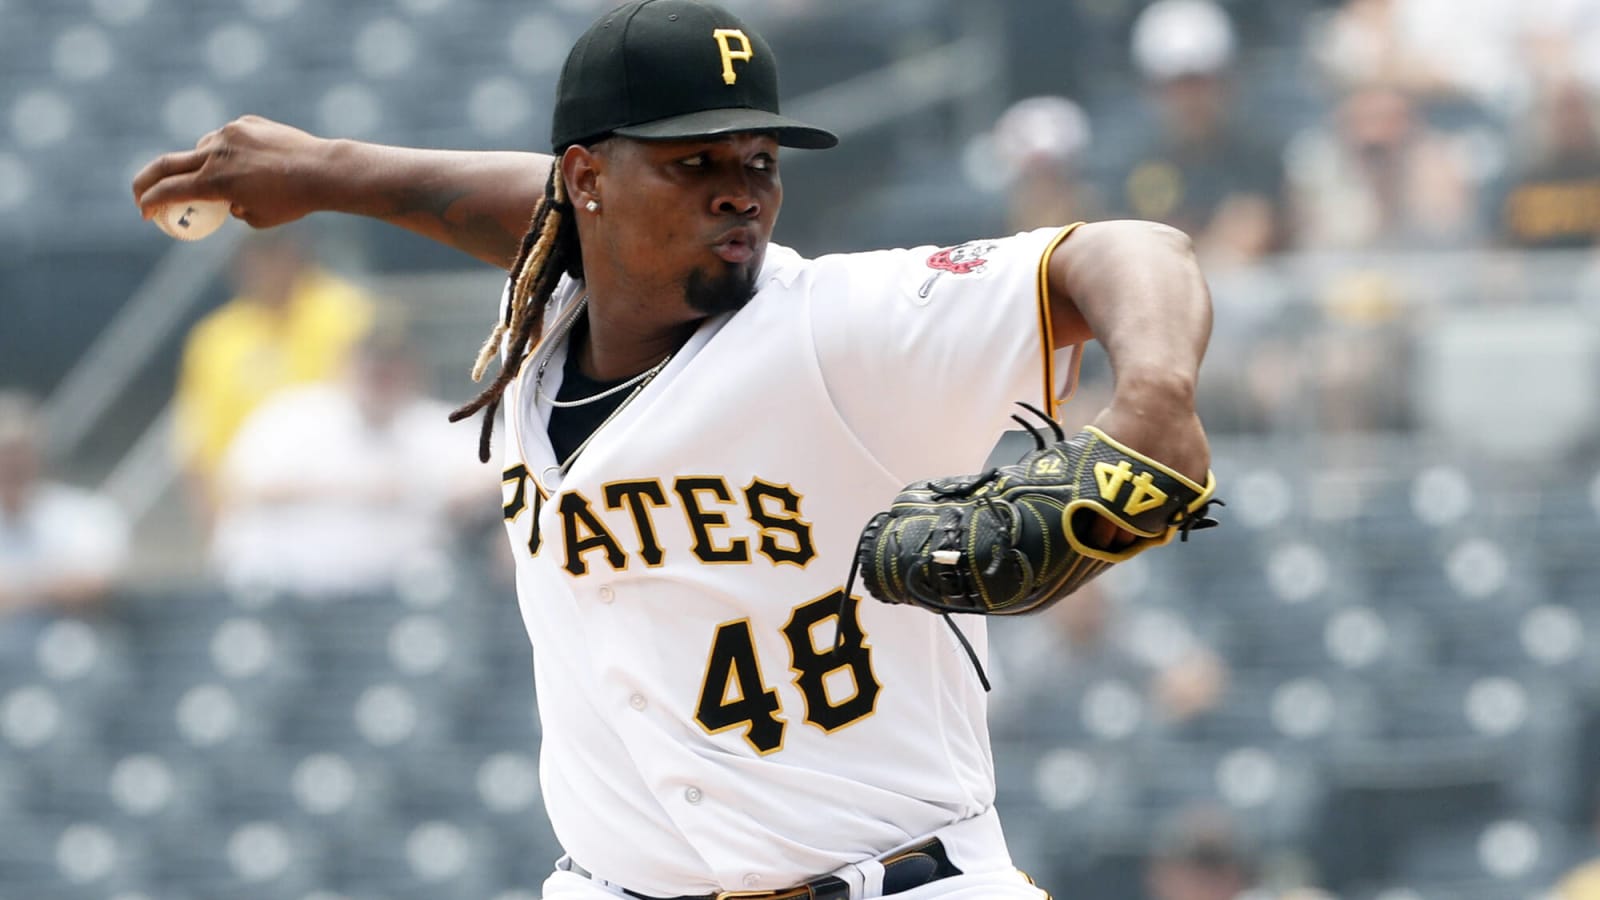 Pirates Add Luis Ortiz to Taxi Squad; Expect Him to Pitch Wednesday